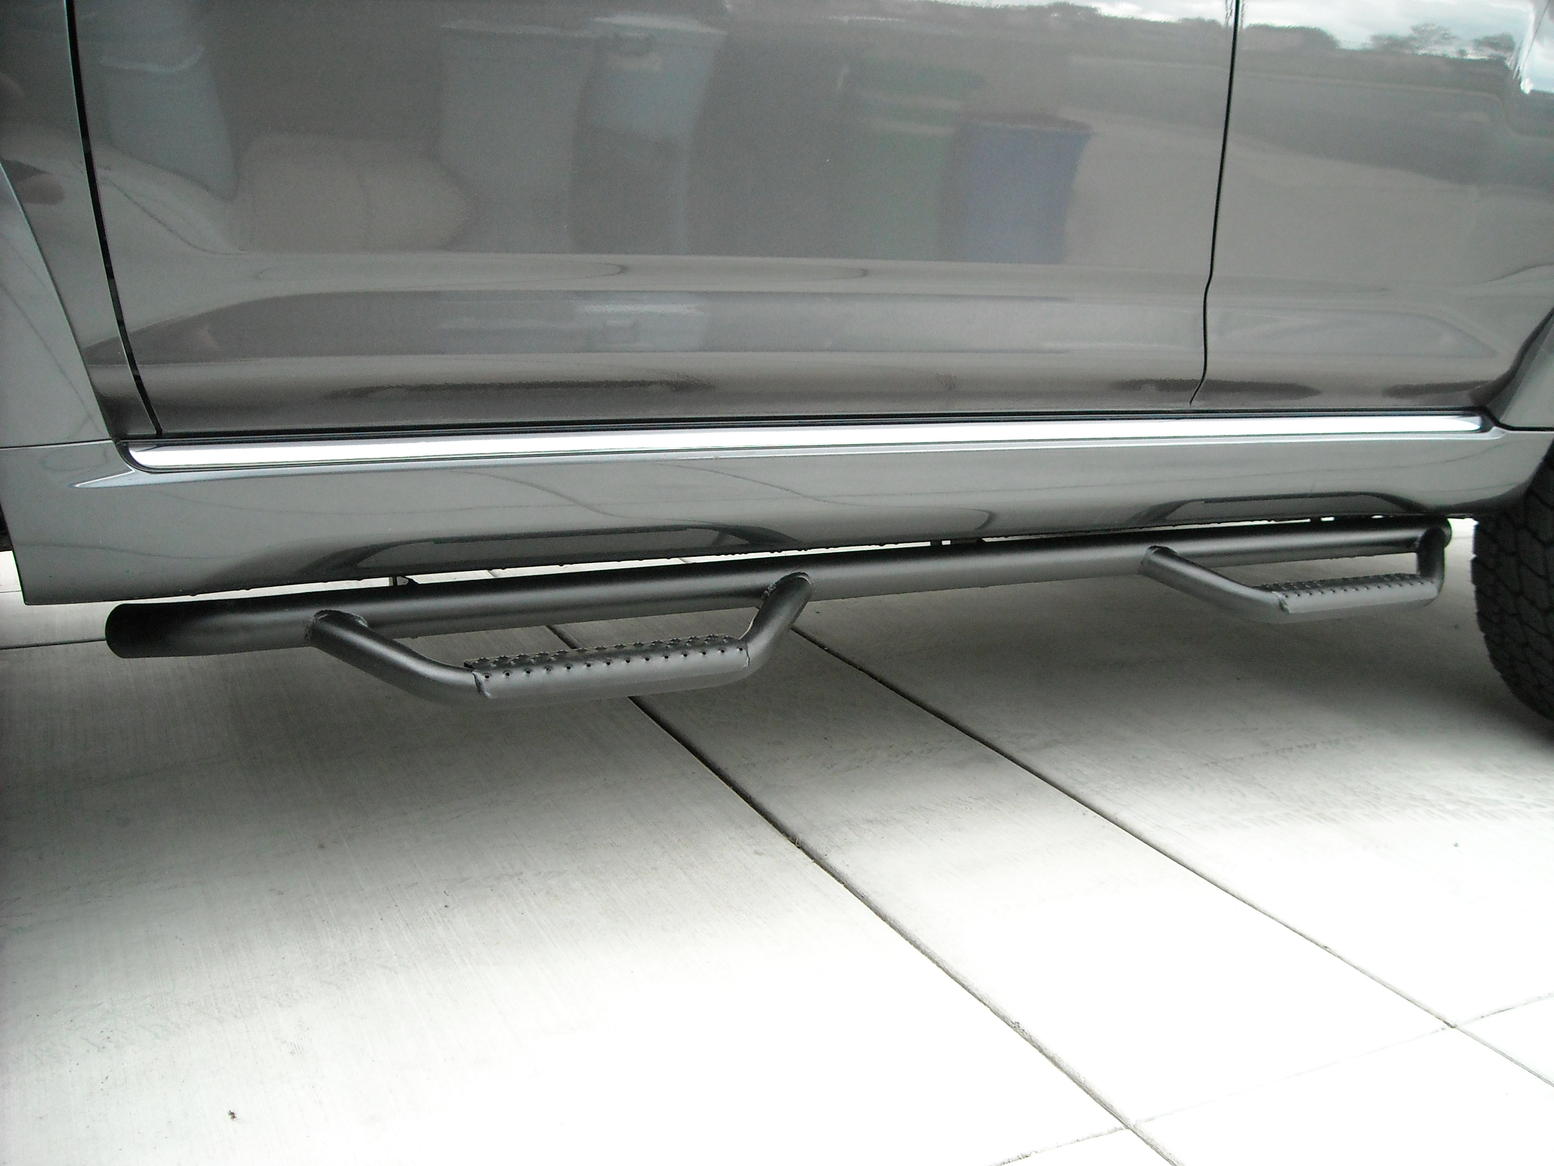 N-Fab step-up / running boards for Trail Edition-dscn0536-jpg